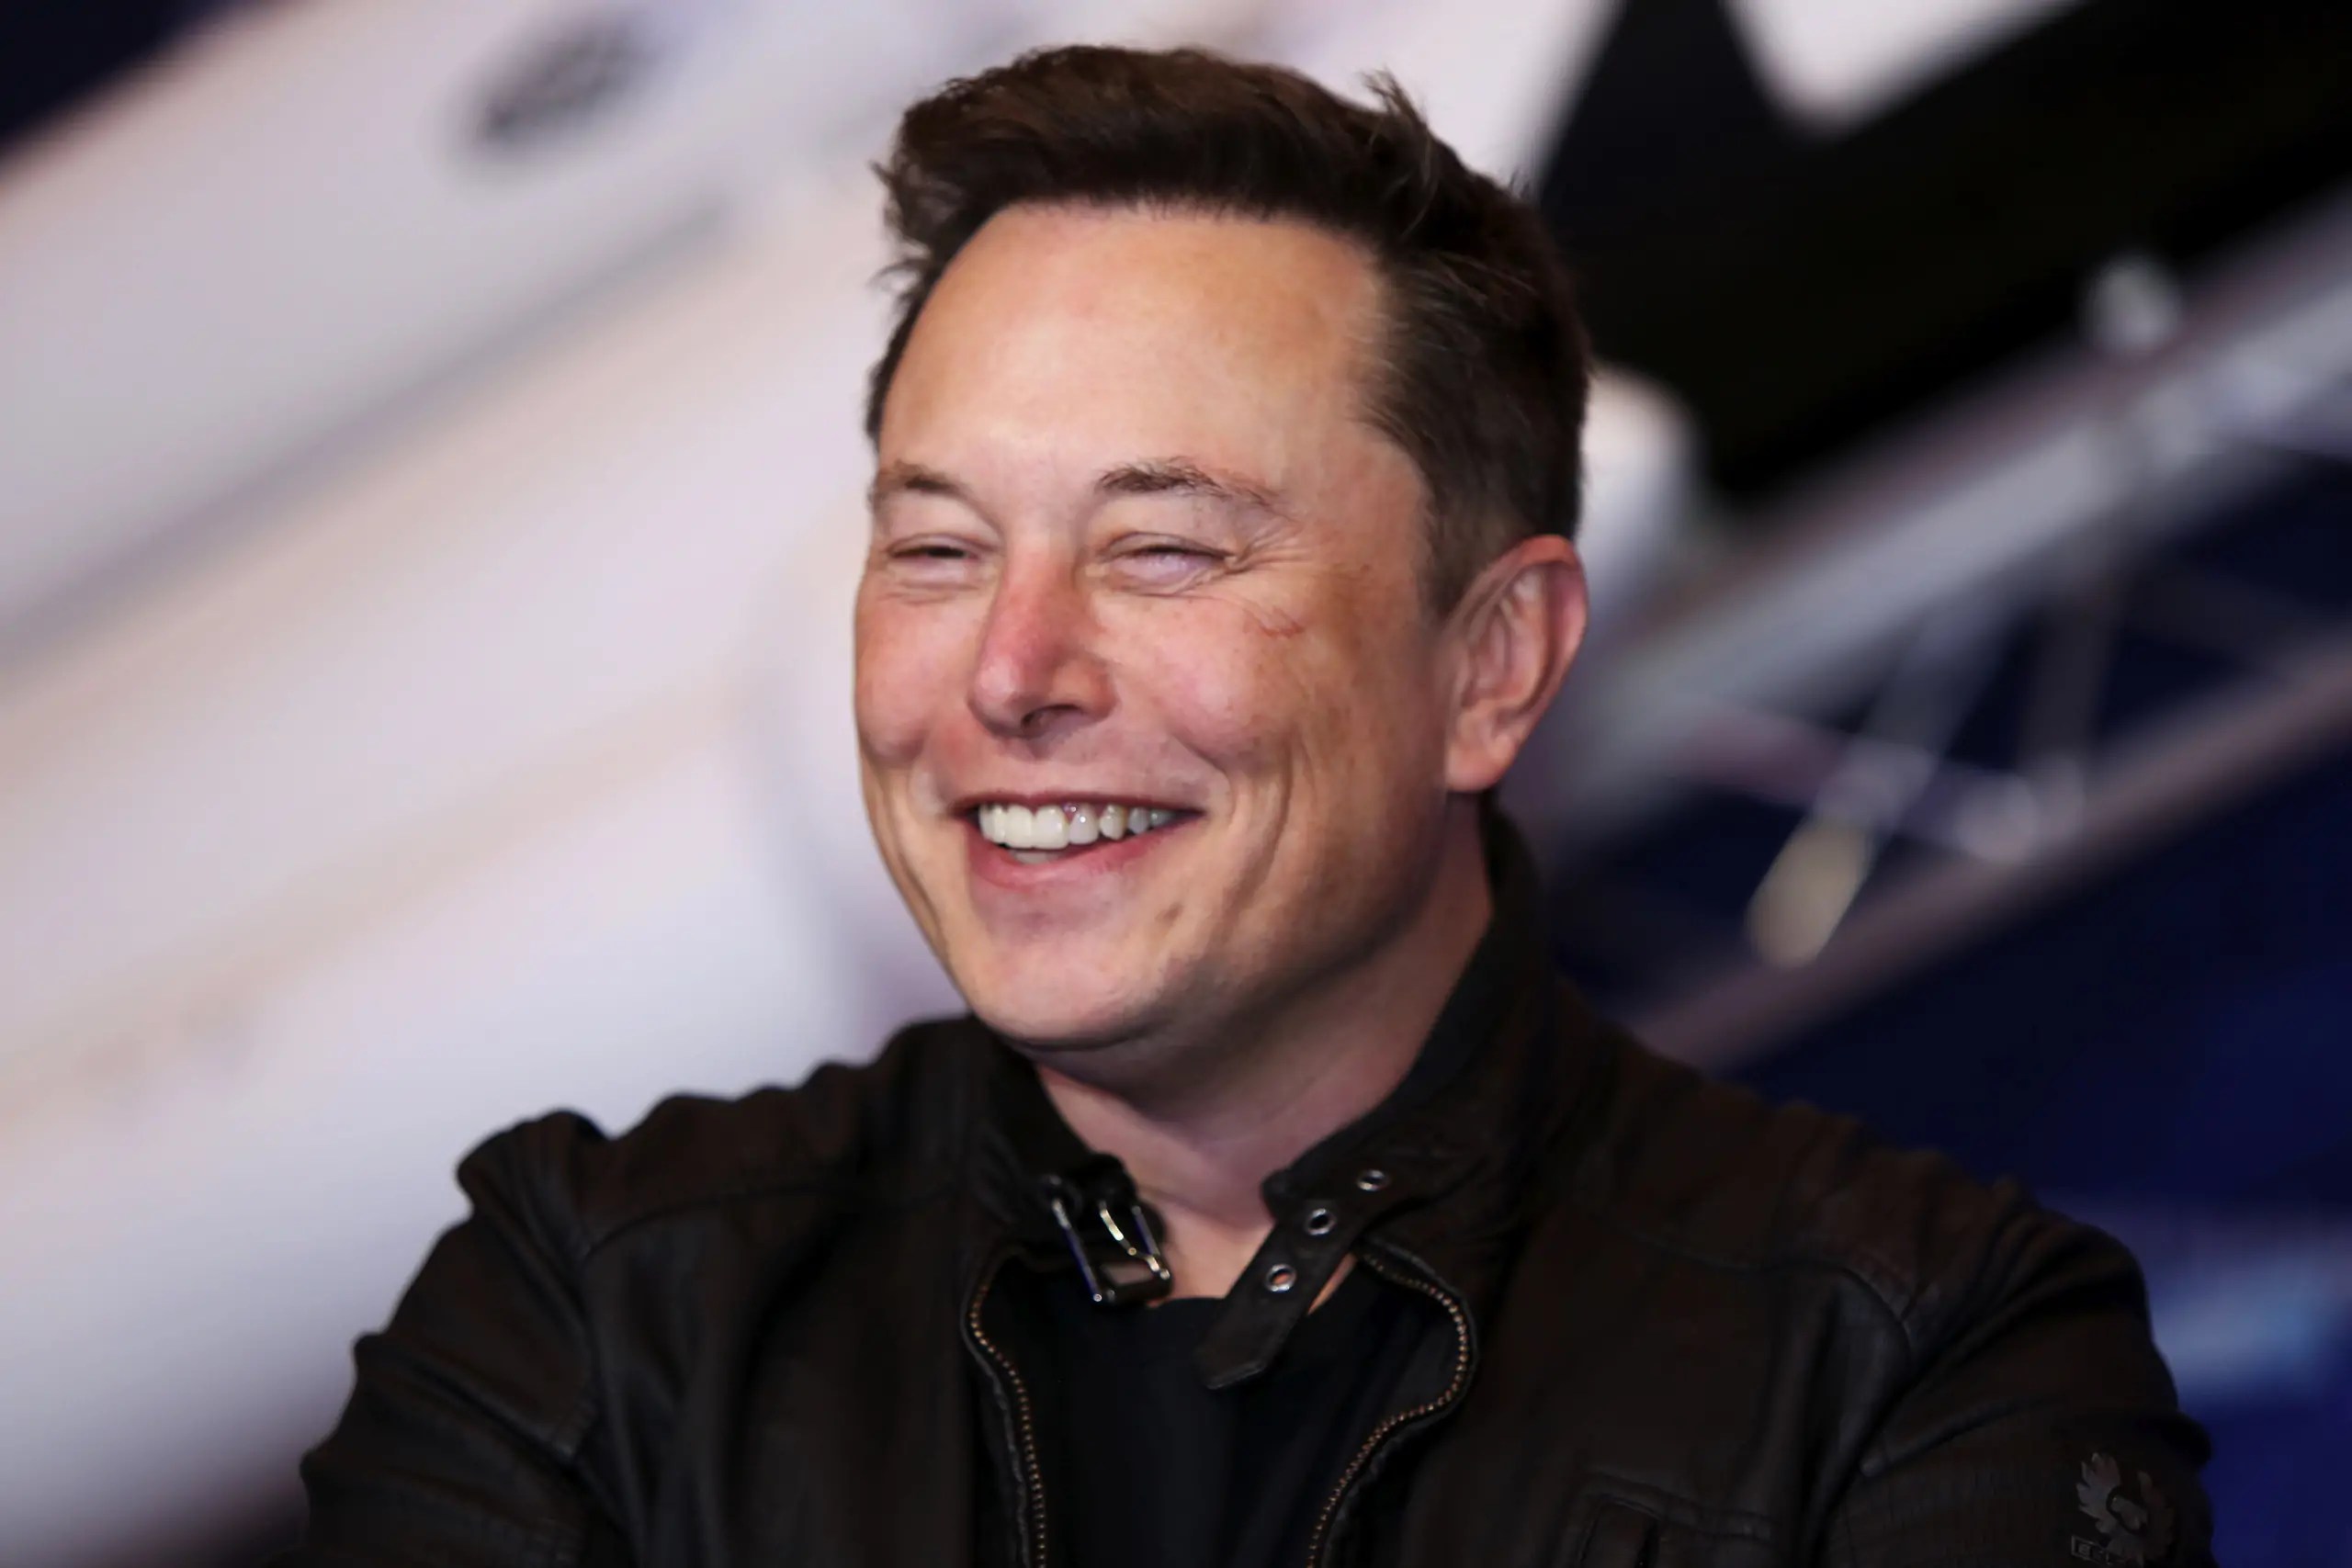 106806367-1607089945571-gettyimages-1229901929-GERMANY_MUSK-scaled.jpeg